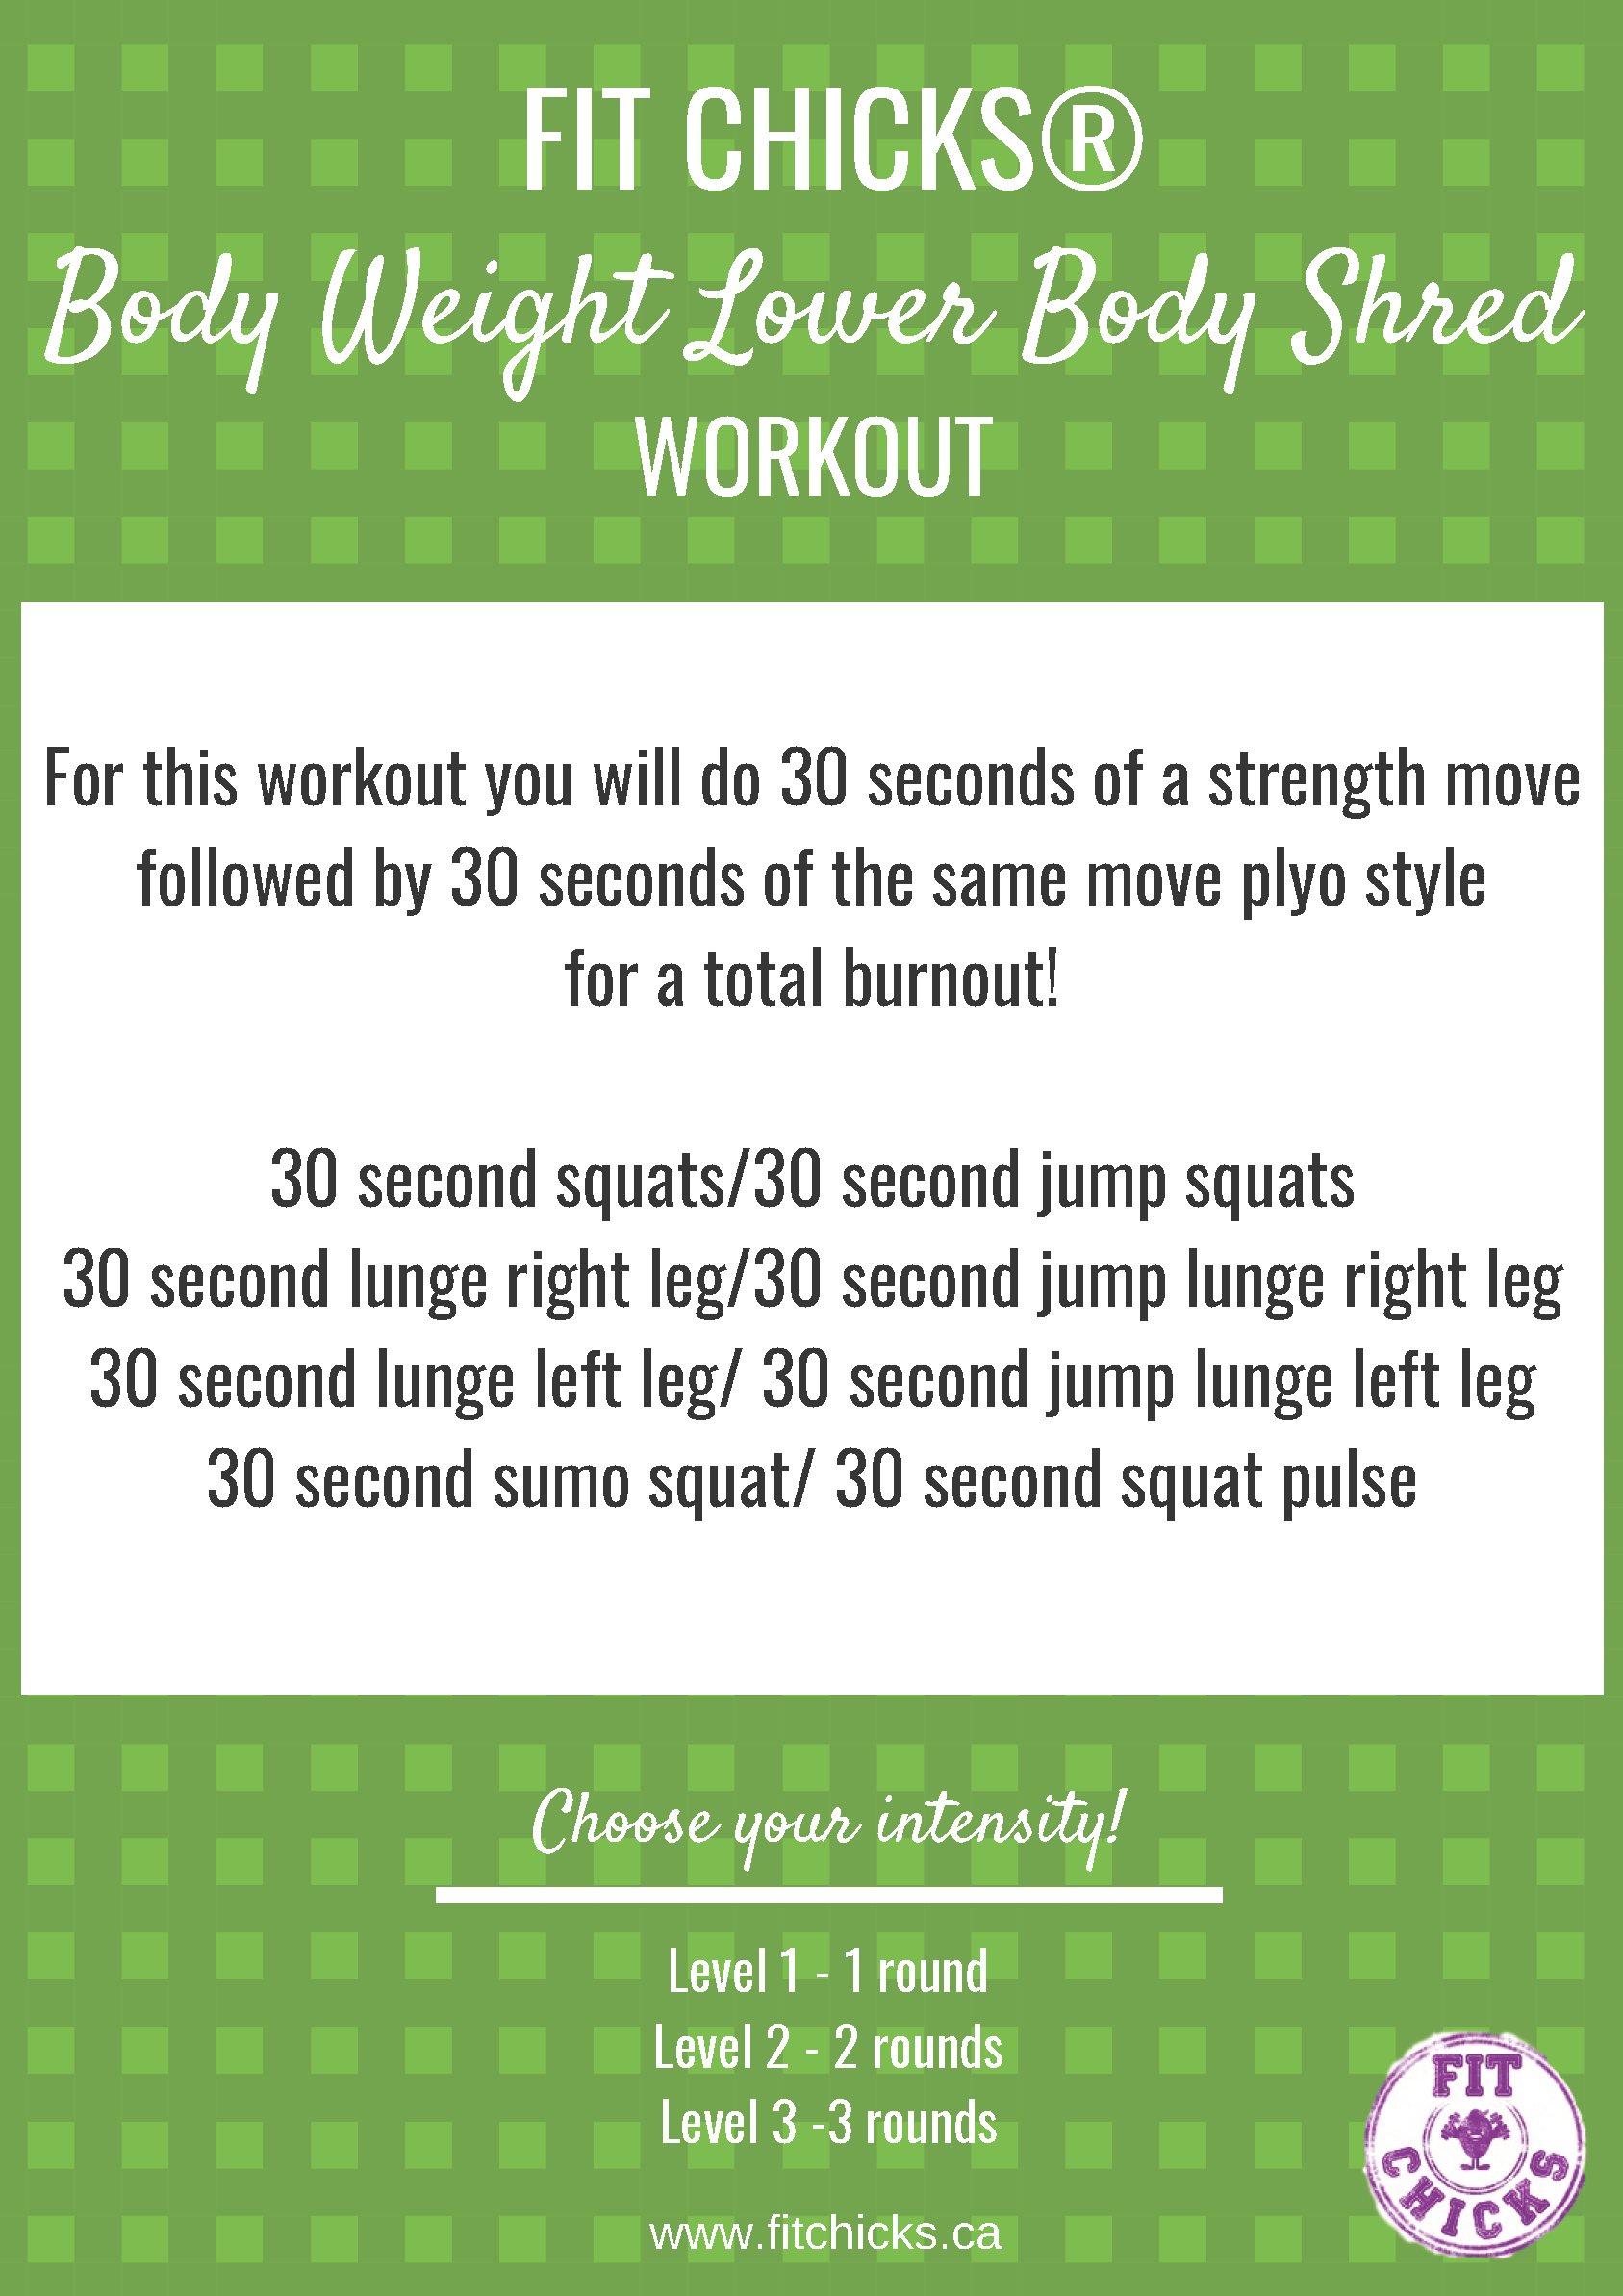 FIT CHICKS Friday Lower Body Shred HIIT Workout - FIT CHICKS ACADEMY